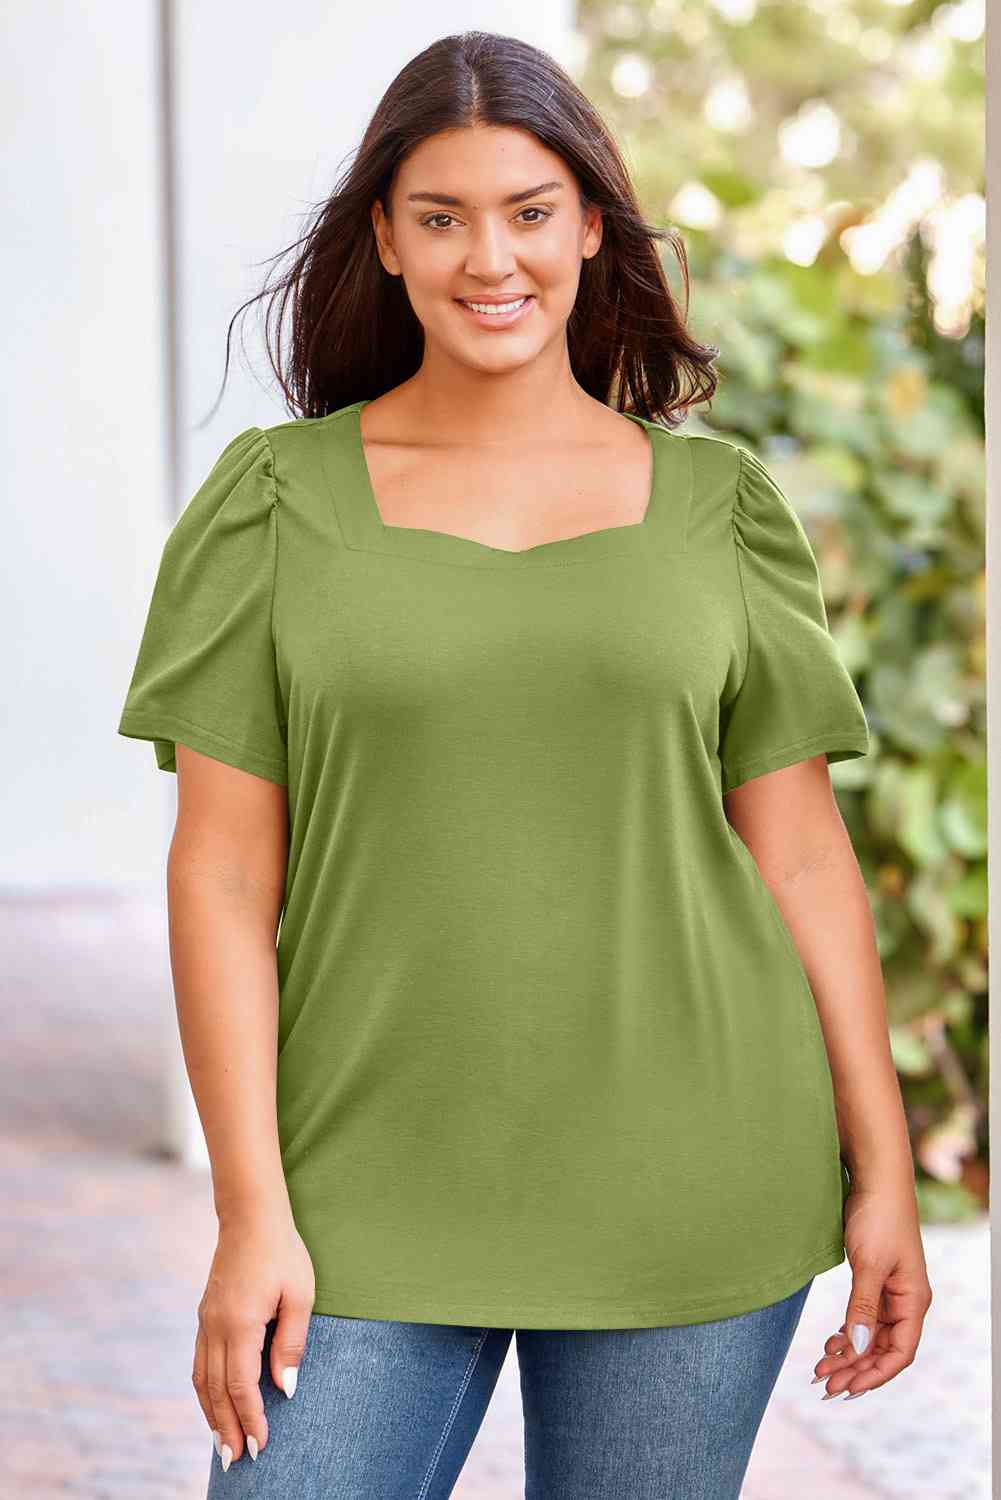 Plus Size Square Neck Puff Sleeve Top (7 Colors) Shirts & Tops Krazy Heart Designs Boutique   